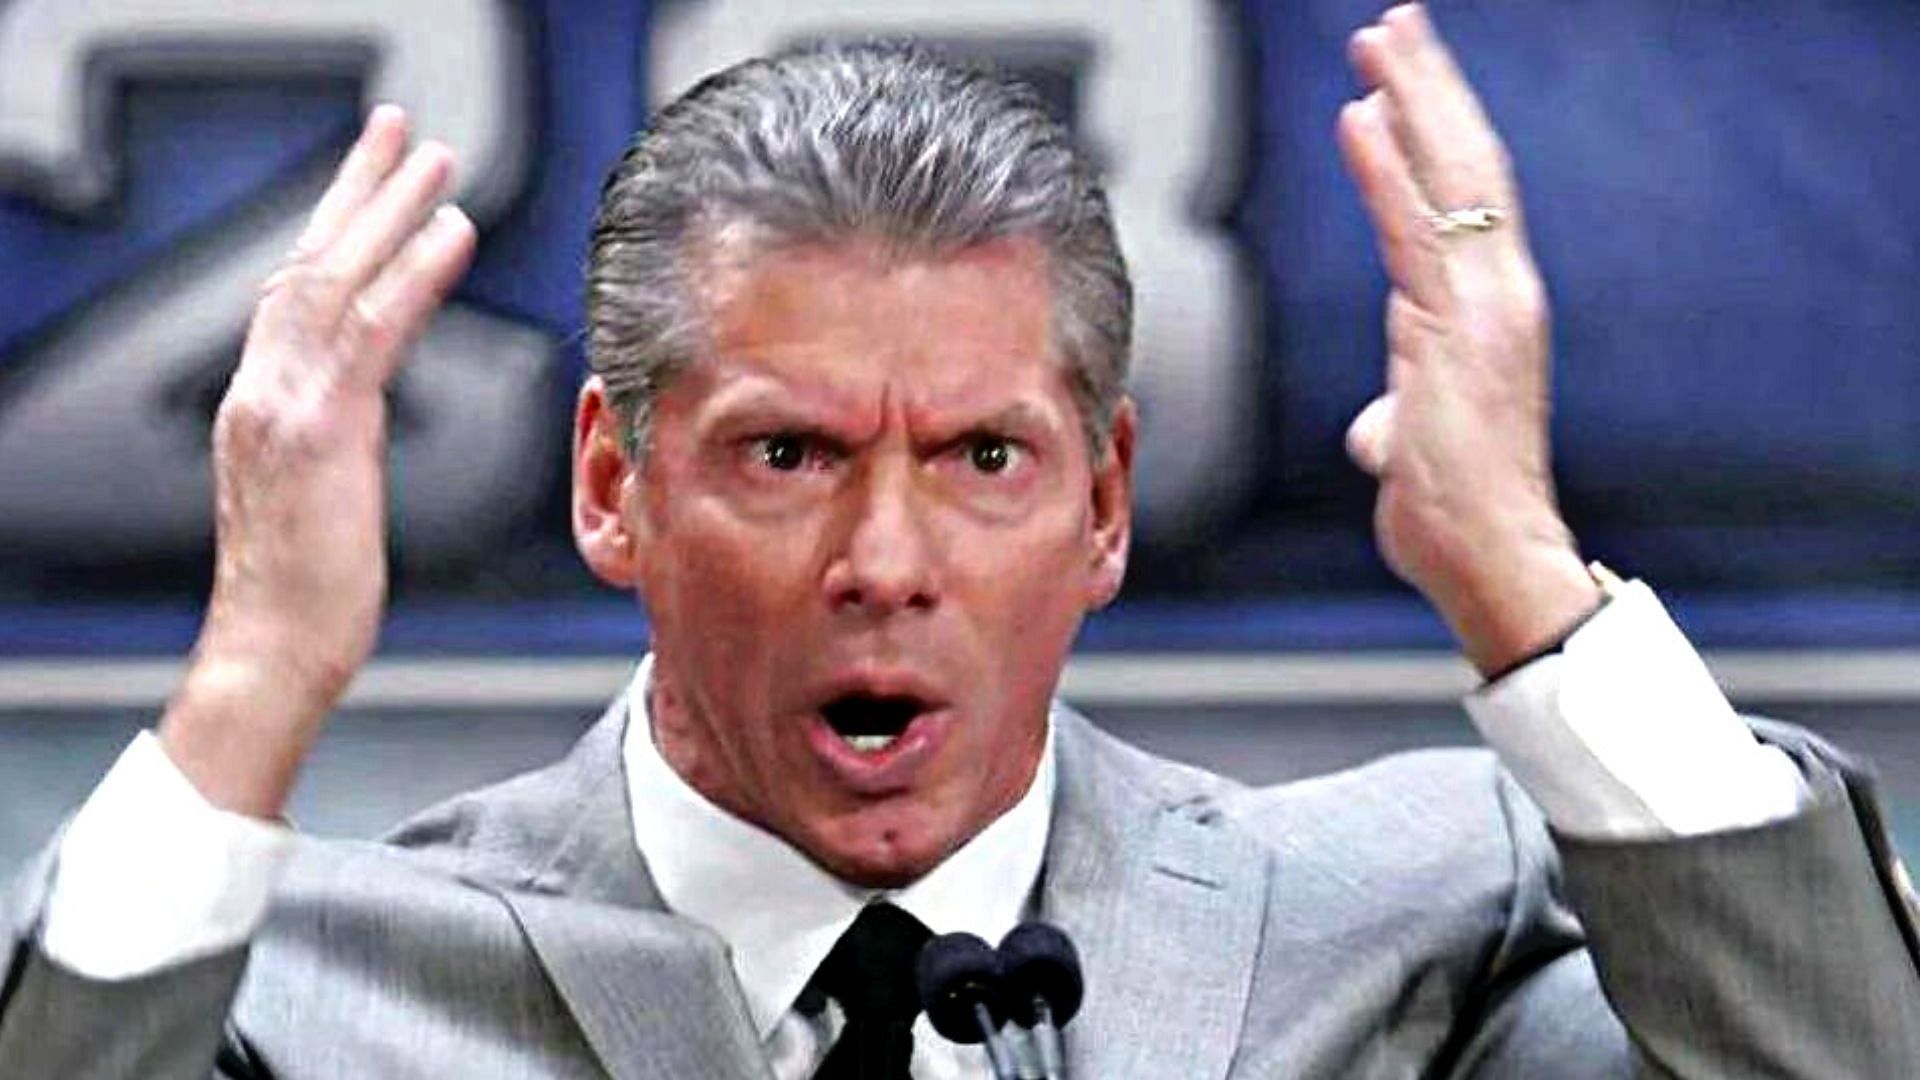 A former WWE name recently shared an amusing Vince McMahon story